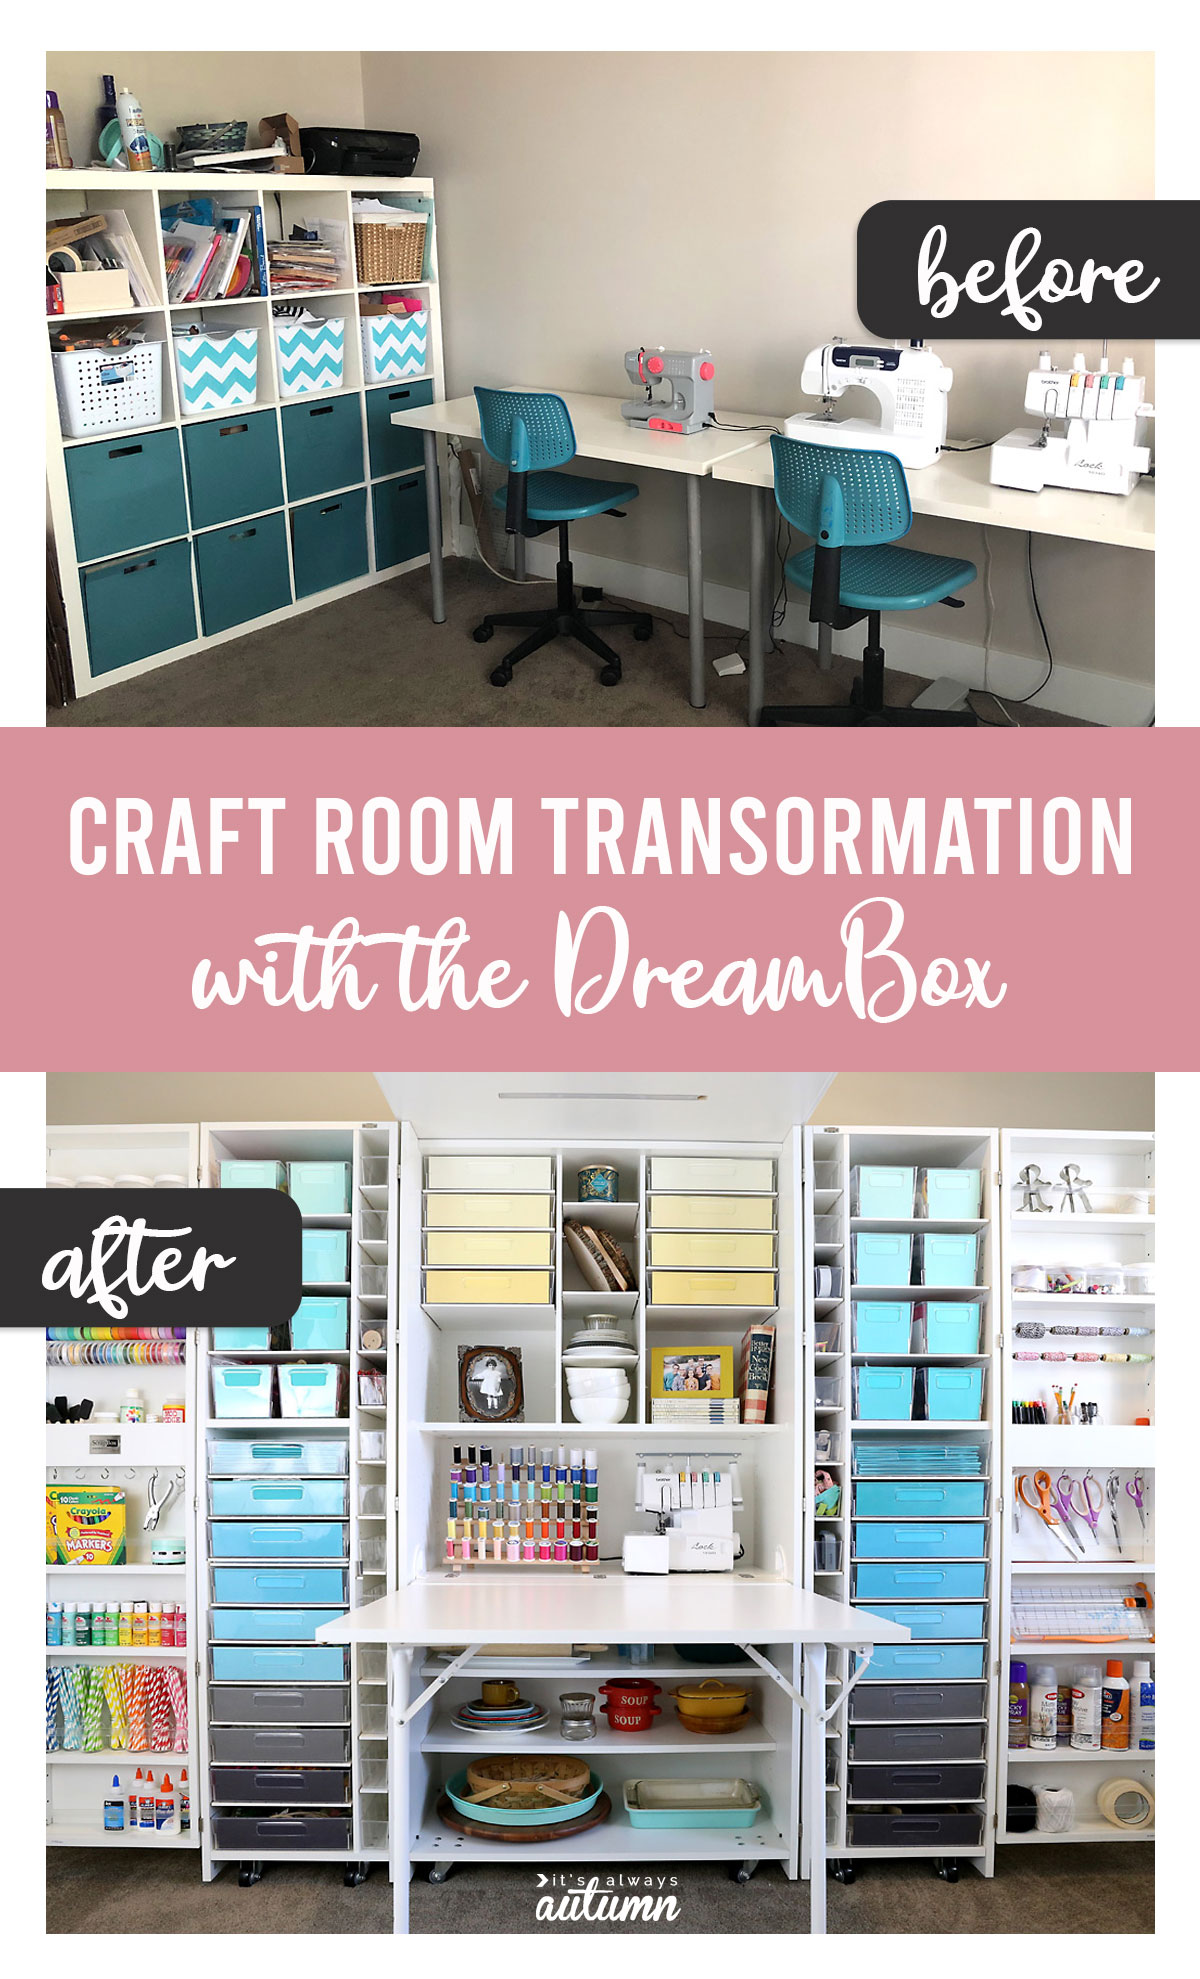 The DreamBox craft room organization + storage system BEFORE and AFTER